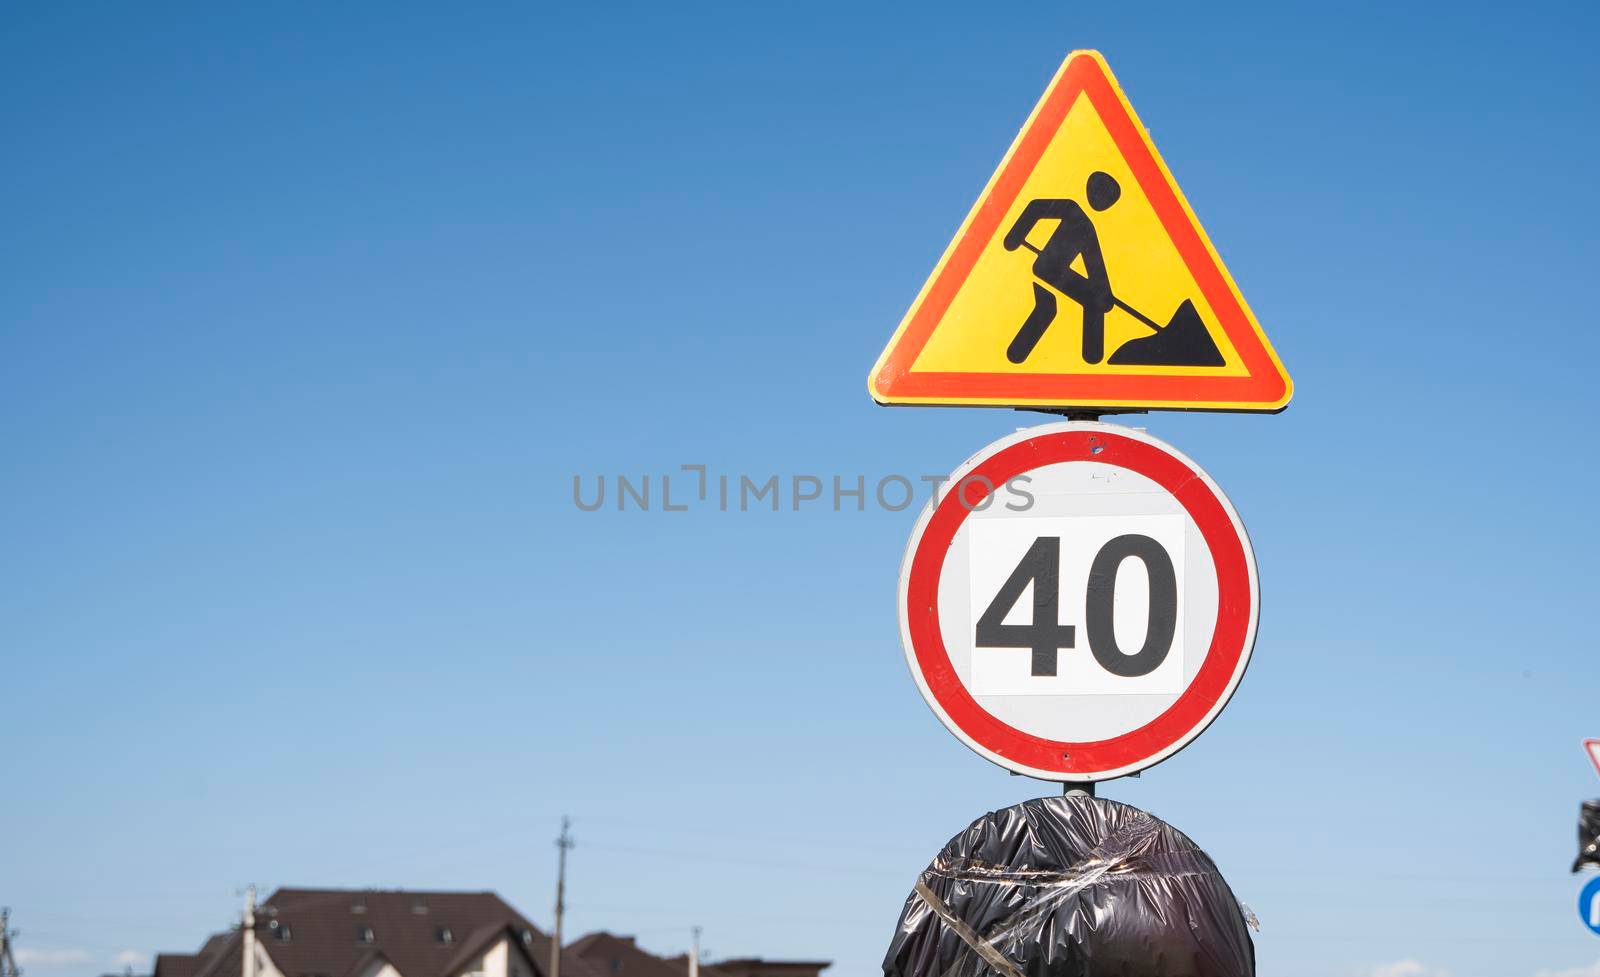 Road marking on the road, warning signs. Direction of detour, sign speed limit 40 and roadworks. Road signs denoting road repairs, speed limit up to 40, detour. by vovsht